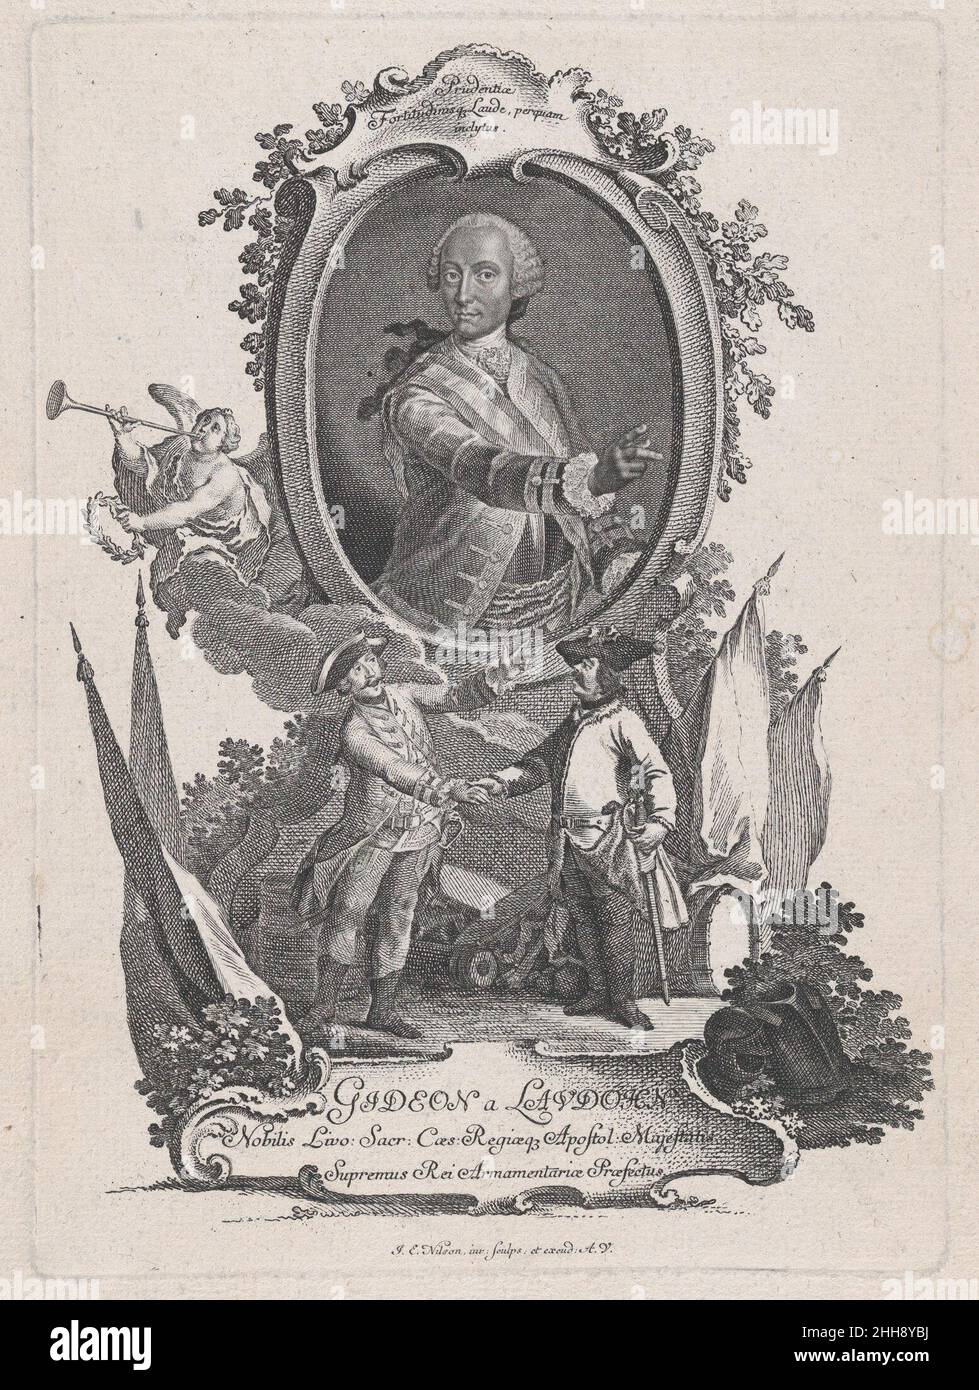 Portrait of Gideon a Laudohn, Nobbleman of Livonia (Latvia) ca. 1740–1760 Johann Esaias Nilson Print with a portrait of Ernst Gideon, Freiherr von Laudon (1717–1790) honoring his accomplishments on the battle field. The half-length portrait of Gideon is presented in an oval frame with a motto placed in a rocaille cartouche at the top. Below the frame two male figures are depicted shaking hands. Around them, armorial attributes are heaped together to form a trophy and on the left side a Victory figure holds up a laurel wreaths and blows on a horn to mark victory.. Portrait of Gideon a Laudohn, Stock Photo